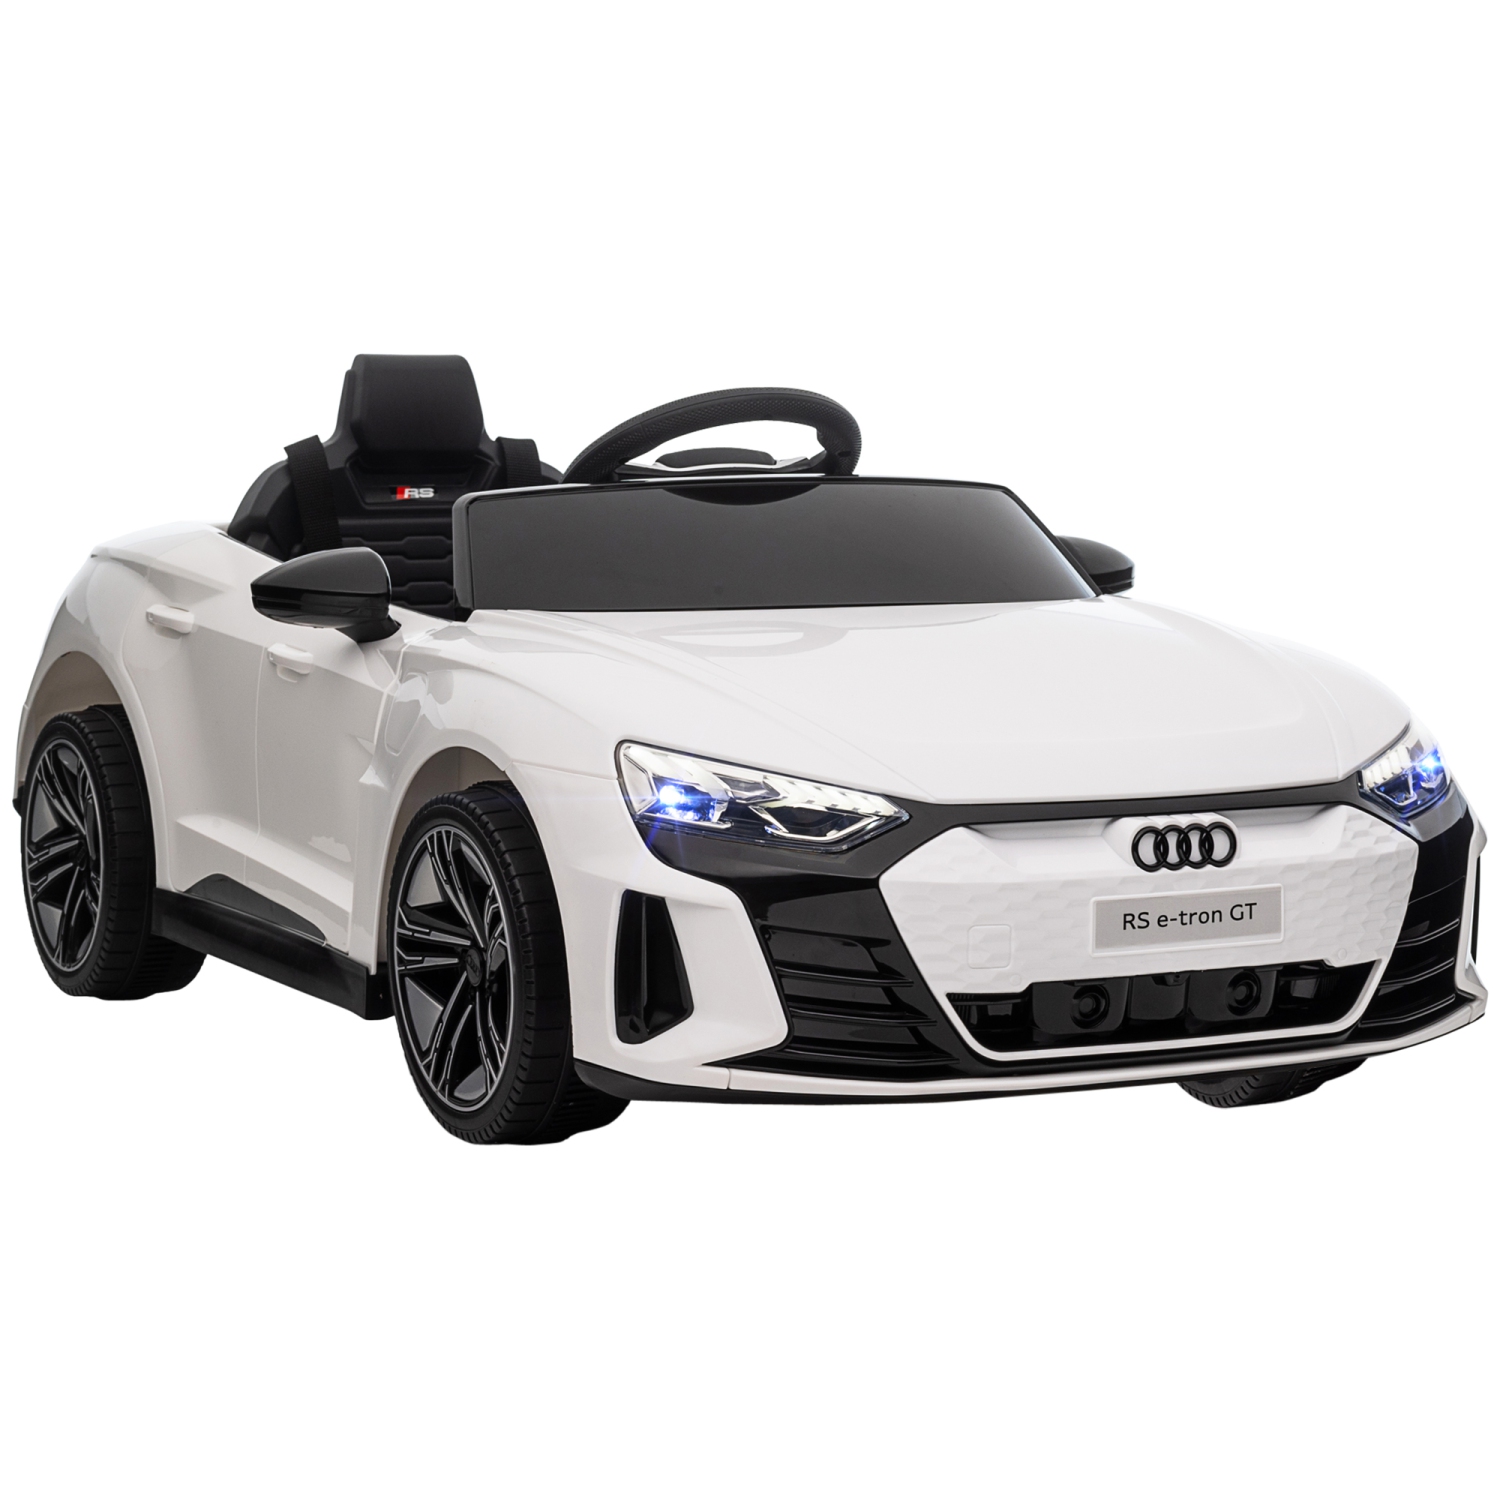 Aosom Electric Ride On Car with Remote Control, 12V 3.1 MPH Kids Ride-On Toy for Boys and Girls with Suspension System, Horn Honking, Music, Lights, White